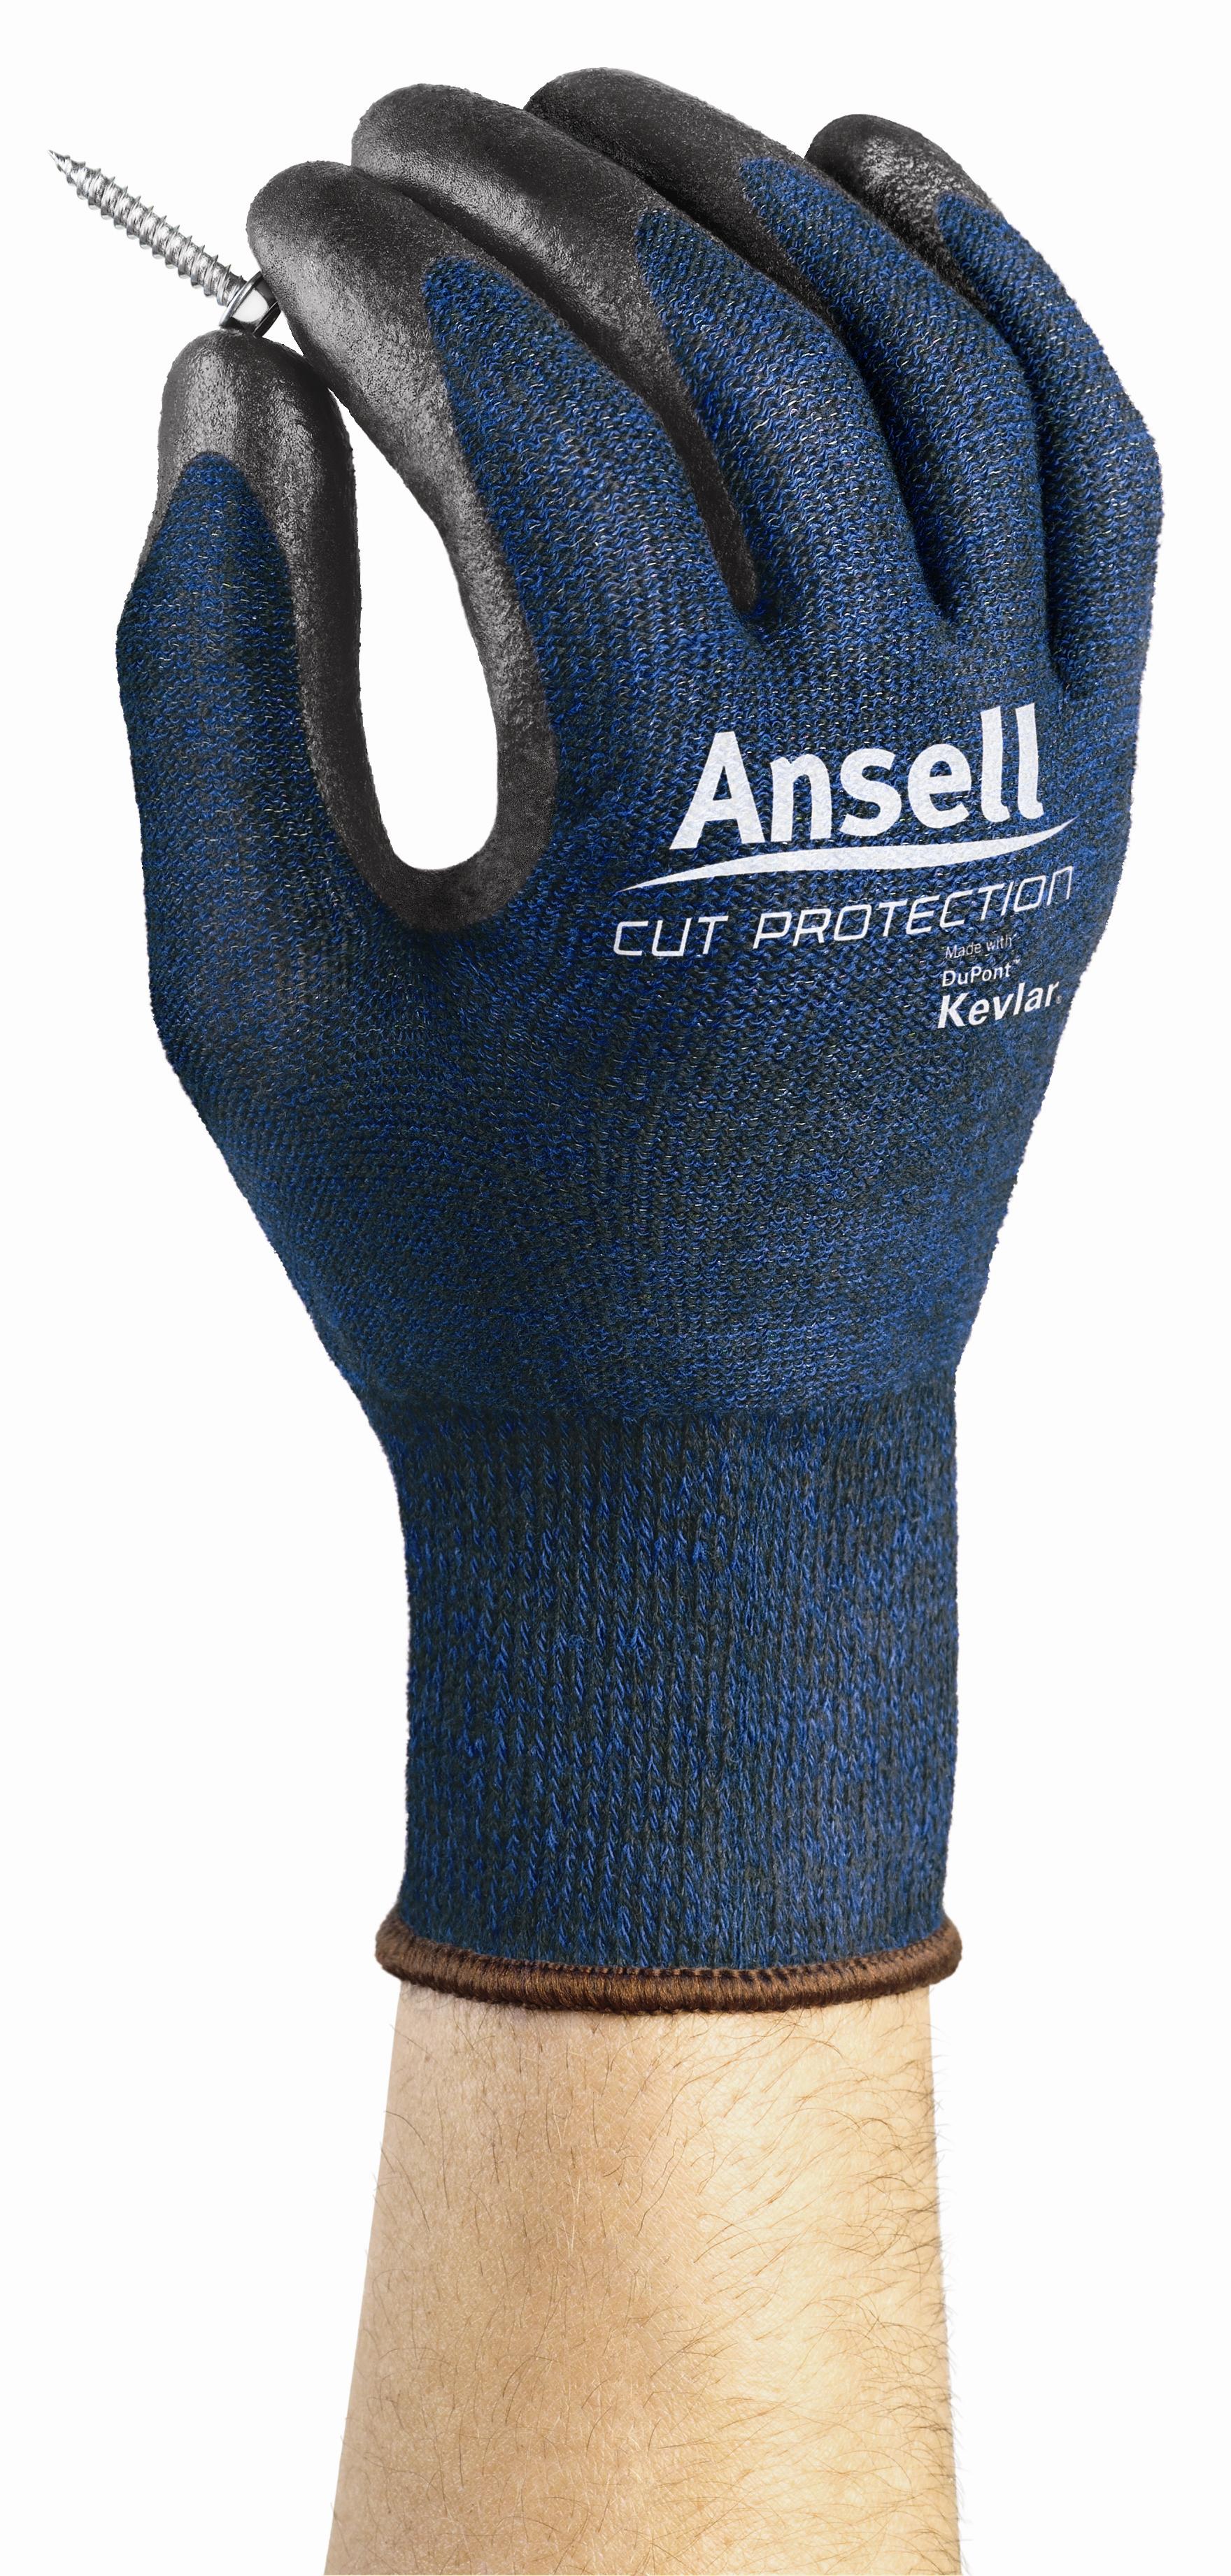 Ansell Releases Cut Protection Glove for Construction Industry